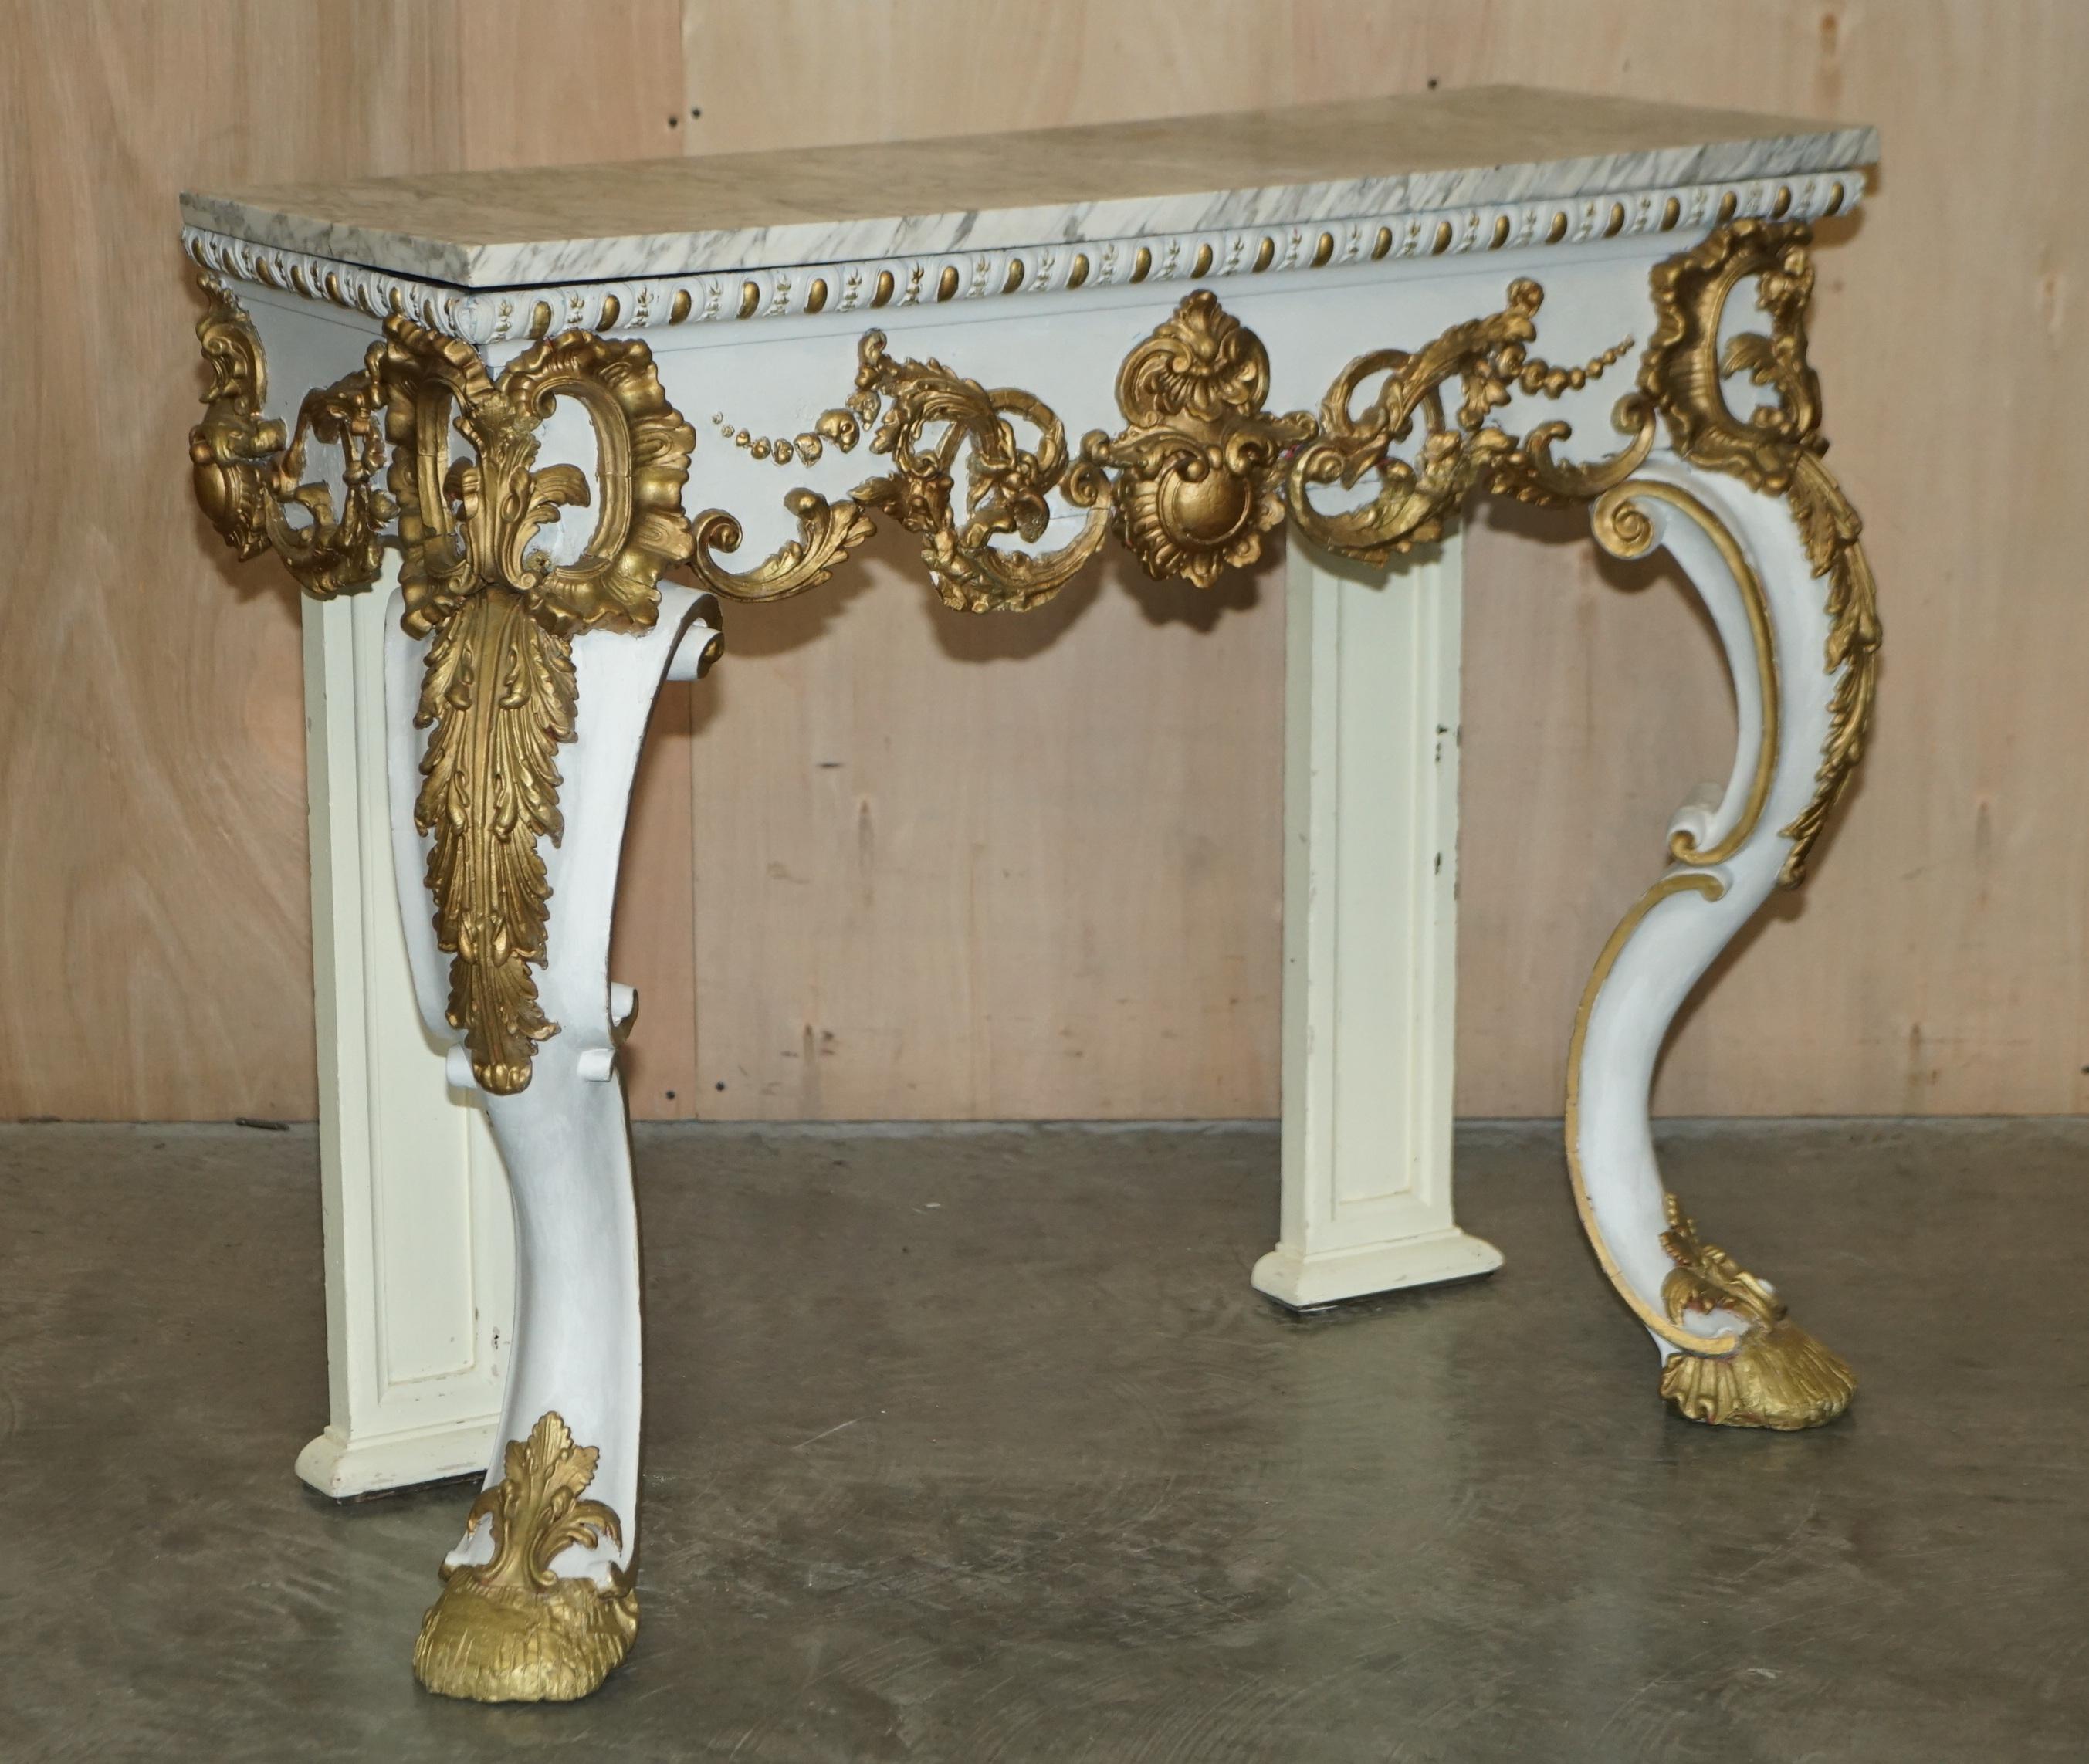 Royal House Antiques

Royal House Antiques is delighted to offer for sale this lovely Italian Giltwood with marble top console table circa 1860 Venice

Please note the delivery fee listed is just a guide, it covers within the M25 only for the UK and